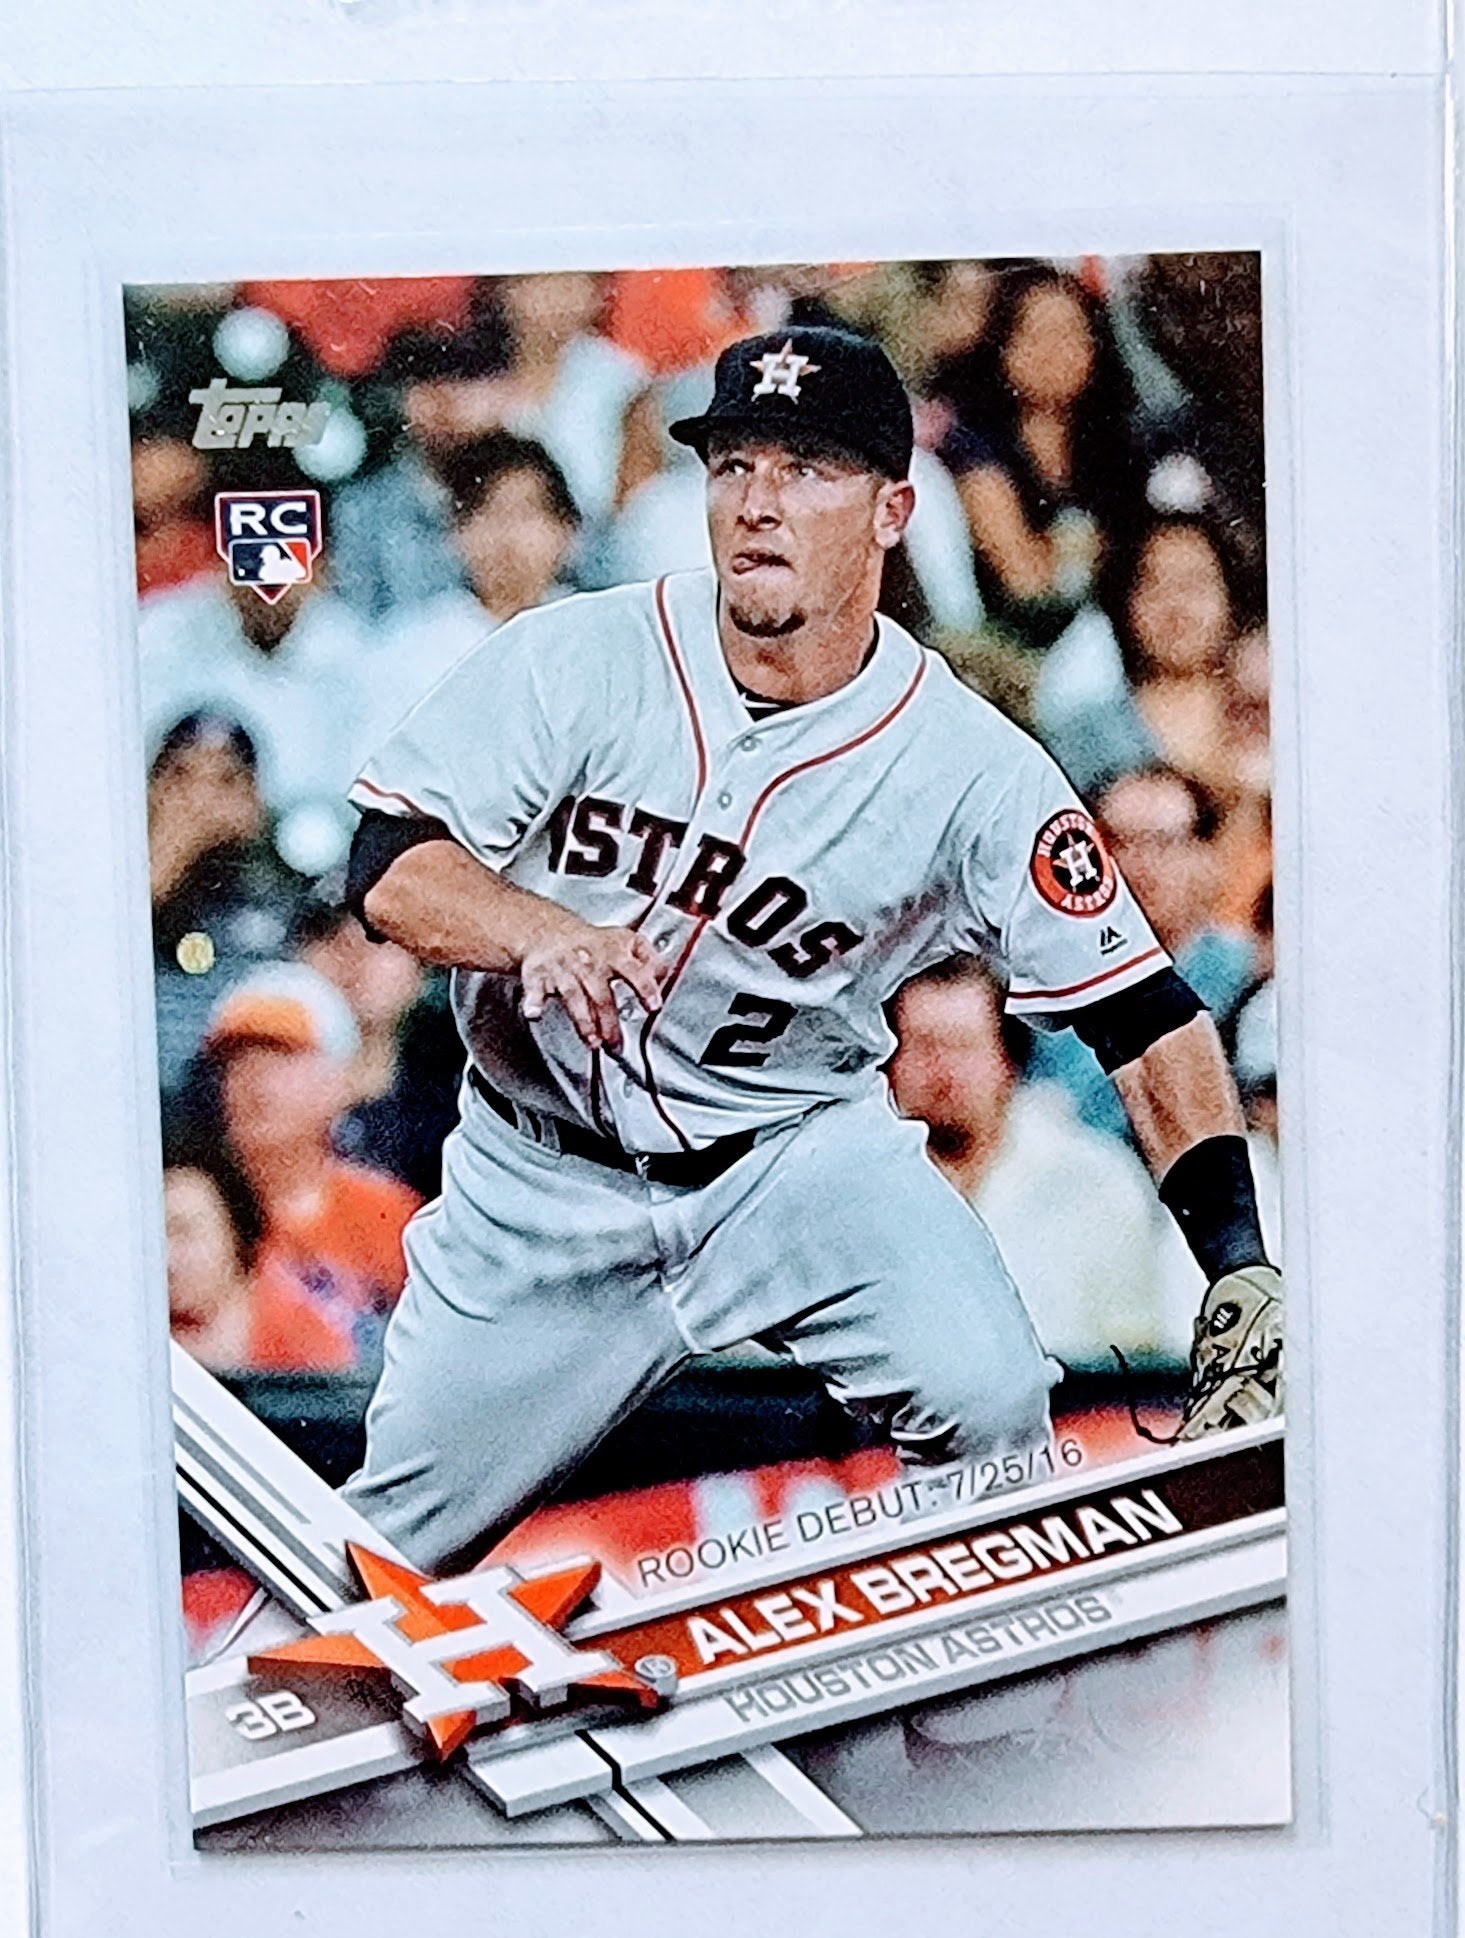 2017 Topps Update Alex Bregman Rookie Debut Rookie Baseball Card TPTV simple Xclusive Collectibles   